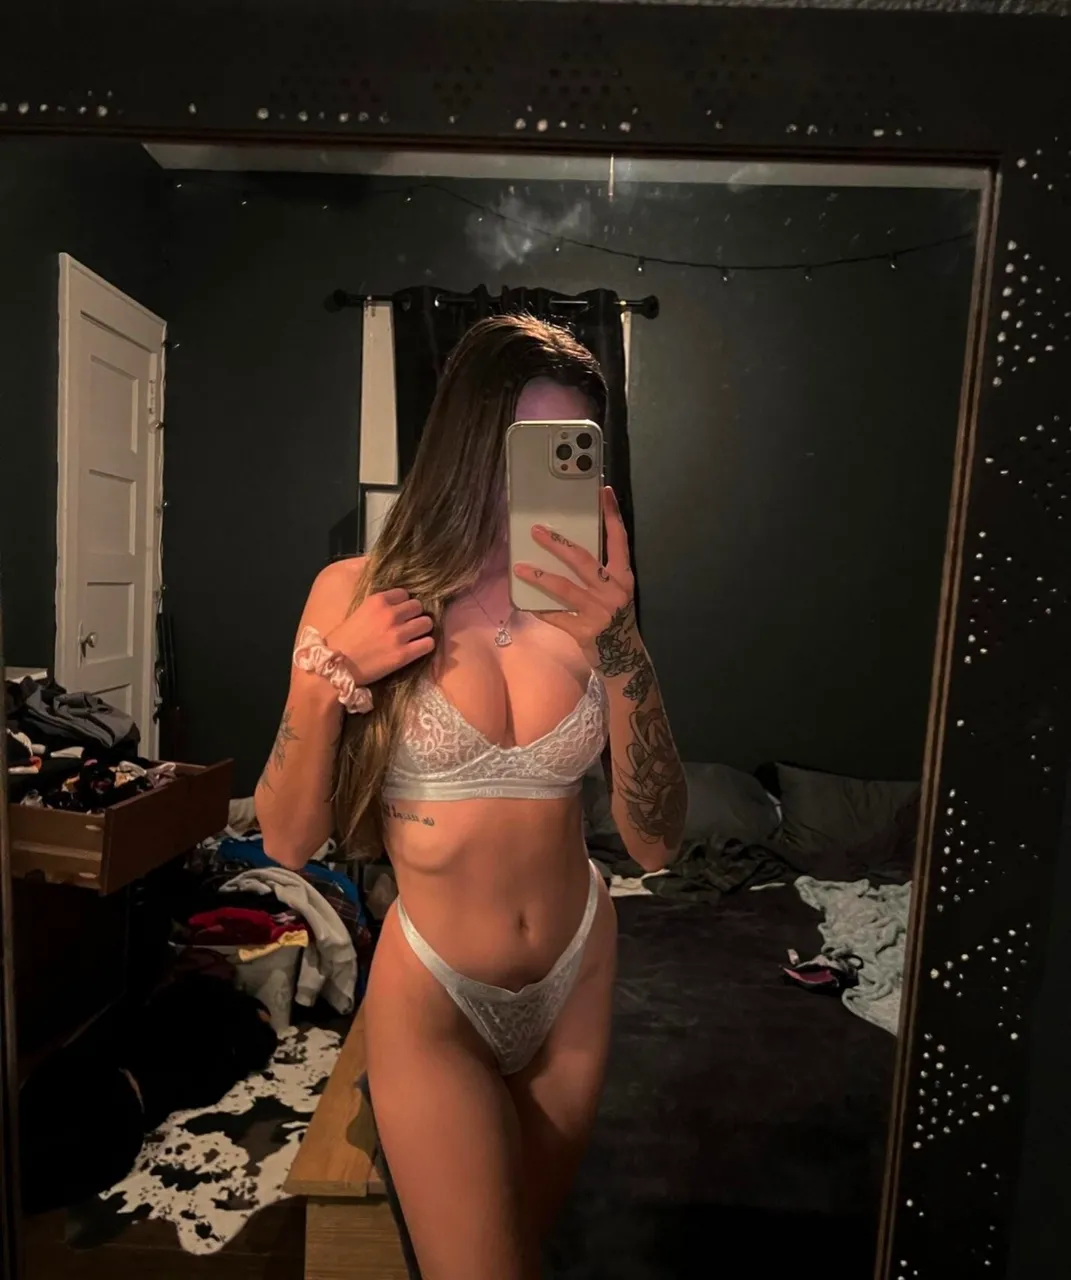 Escorts Worcester, Massachusetts iM NEW JUICY, HOT🔥CREAMY 💦SEXY AND AVAILABLE TO SATISFY 🍆YOU COMPLETELY👅